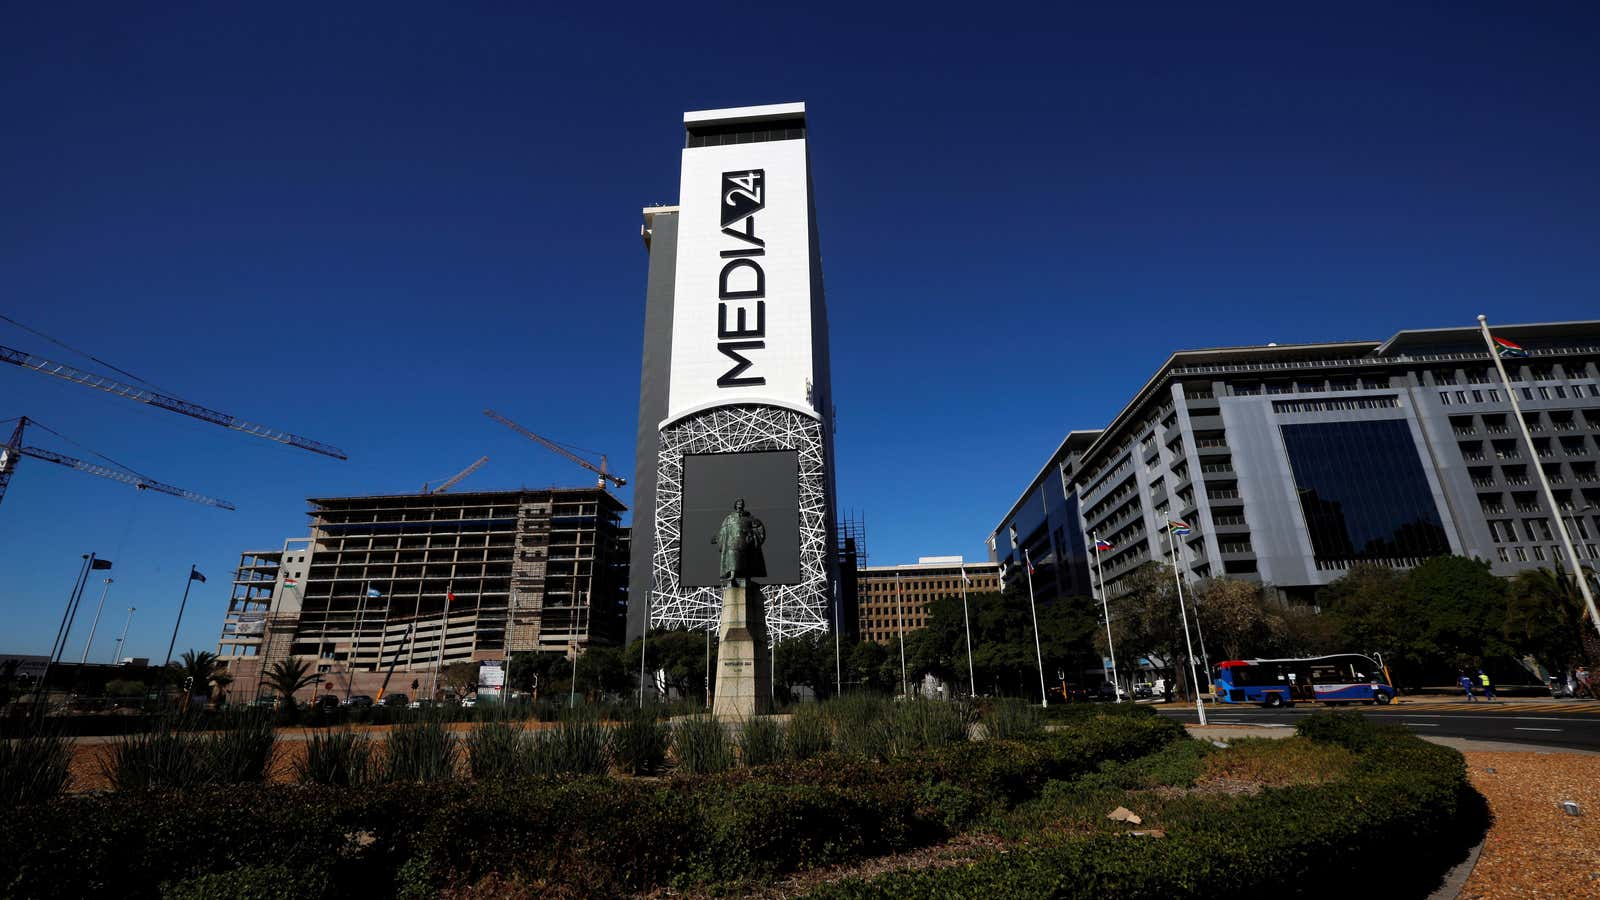 The headquarters of Media 24, owned by internet, entertainment and media group Naspers, in Cape Town, South Africa.